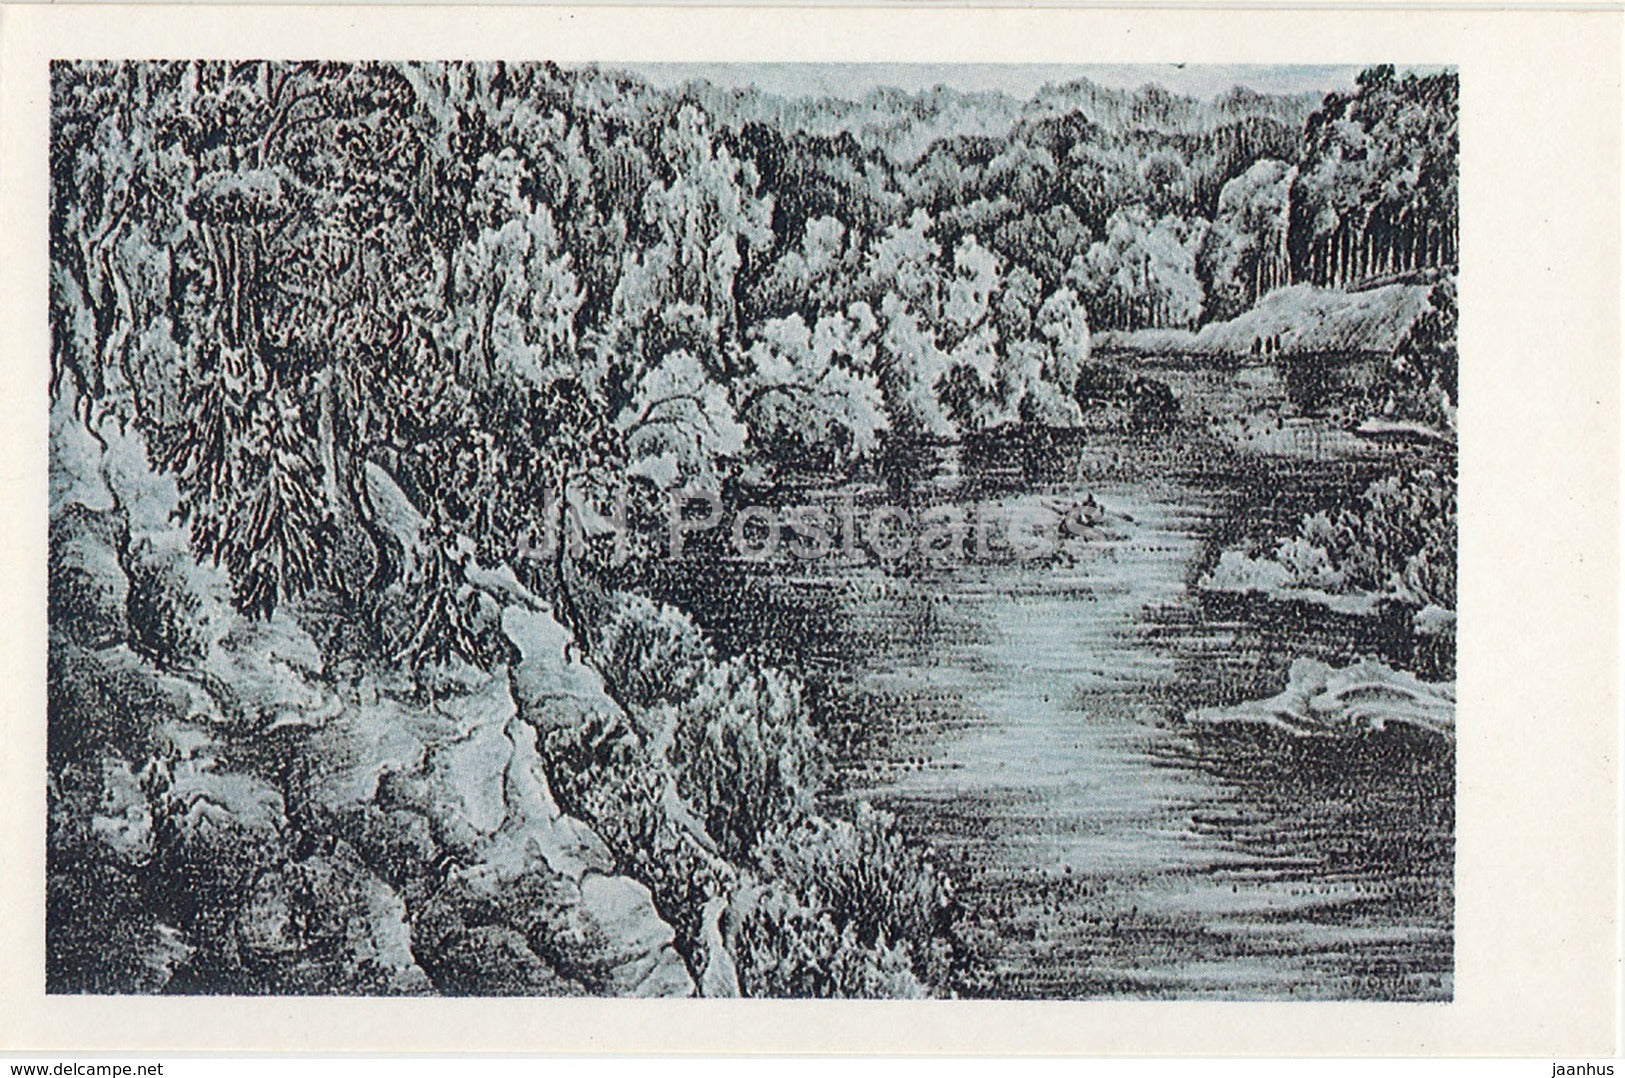 Lithography by R. Opmane - The Gauja River - latvian art - Gauja National Park - 1982 - Latvia USSR - unused - JH Postcards